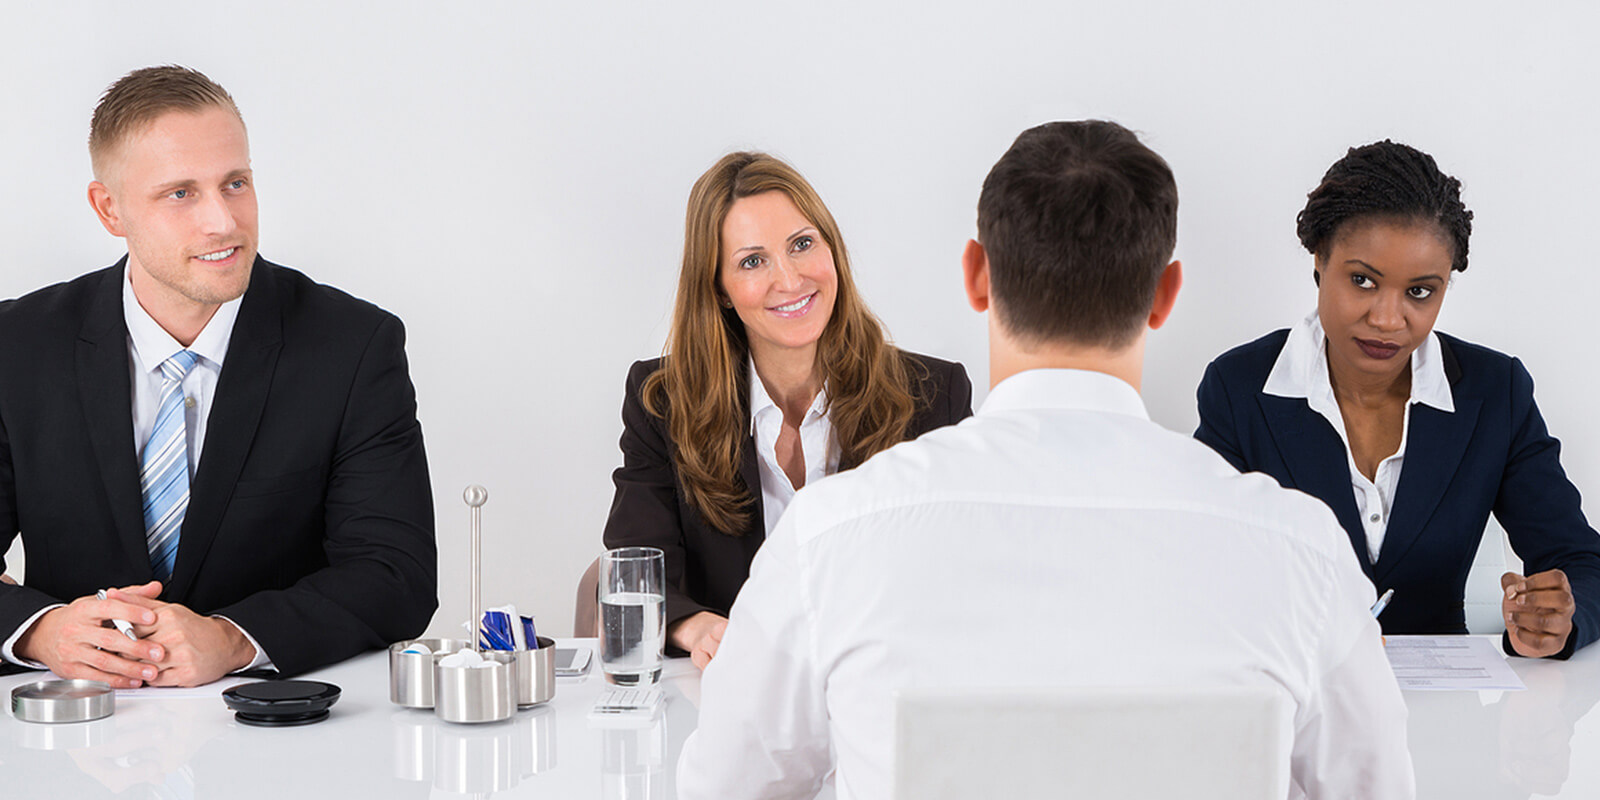 30-of-the-Most-Common-Job-Interview-Questions-With-Example-Answers